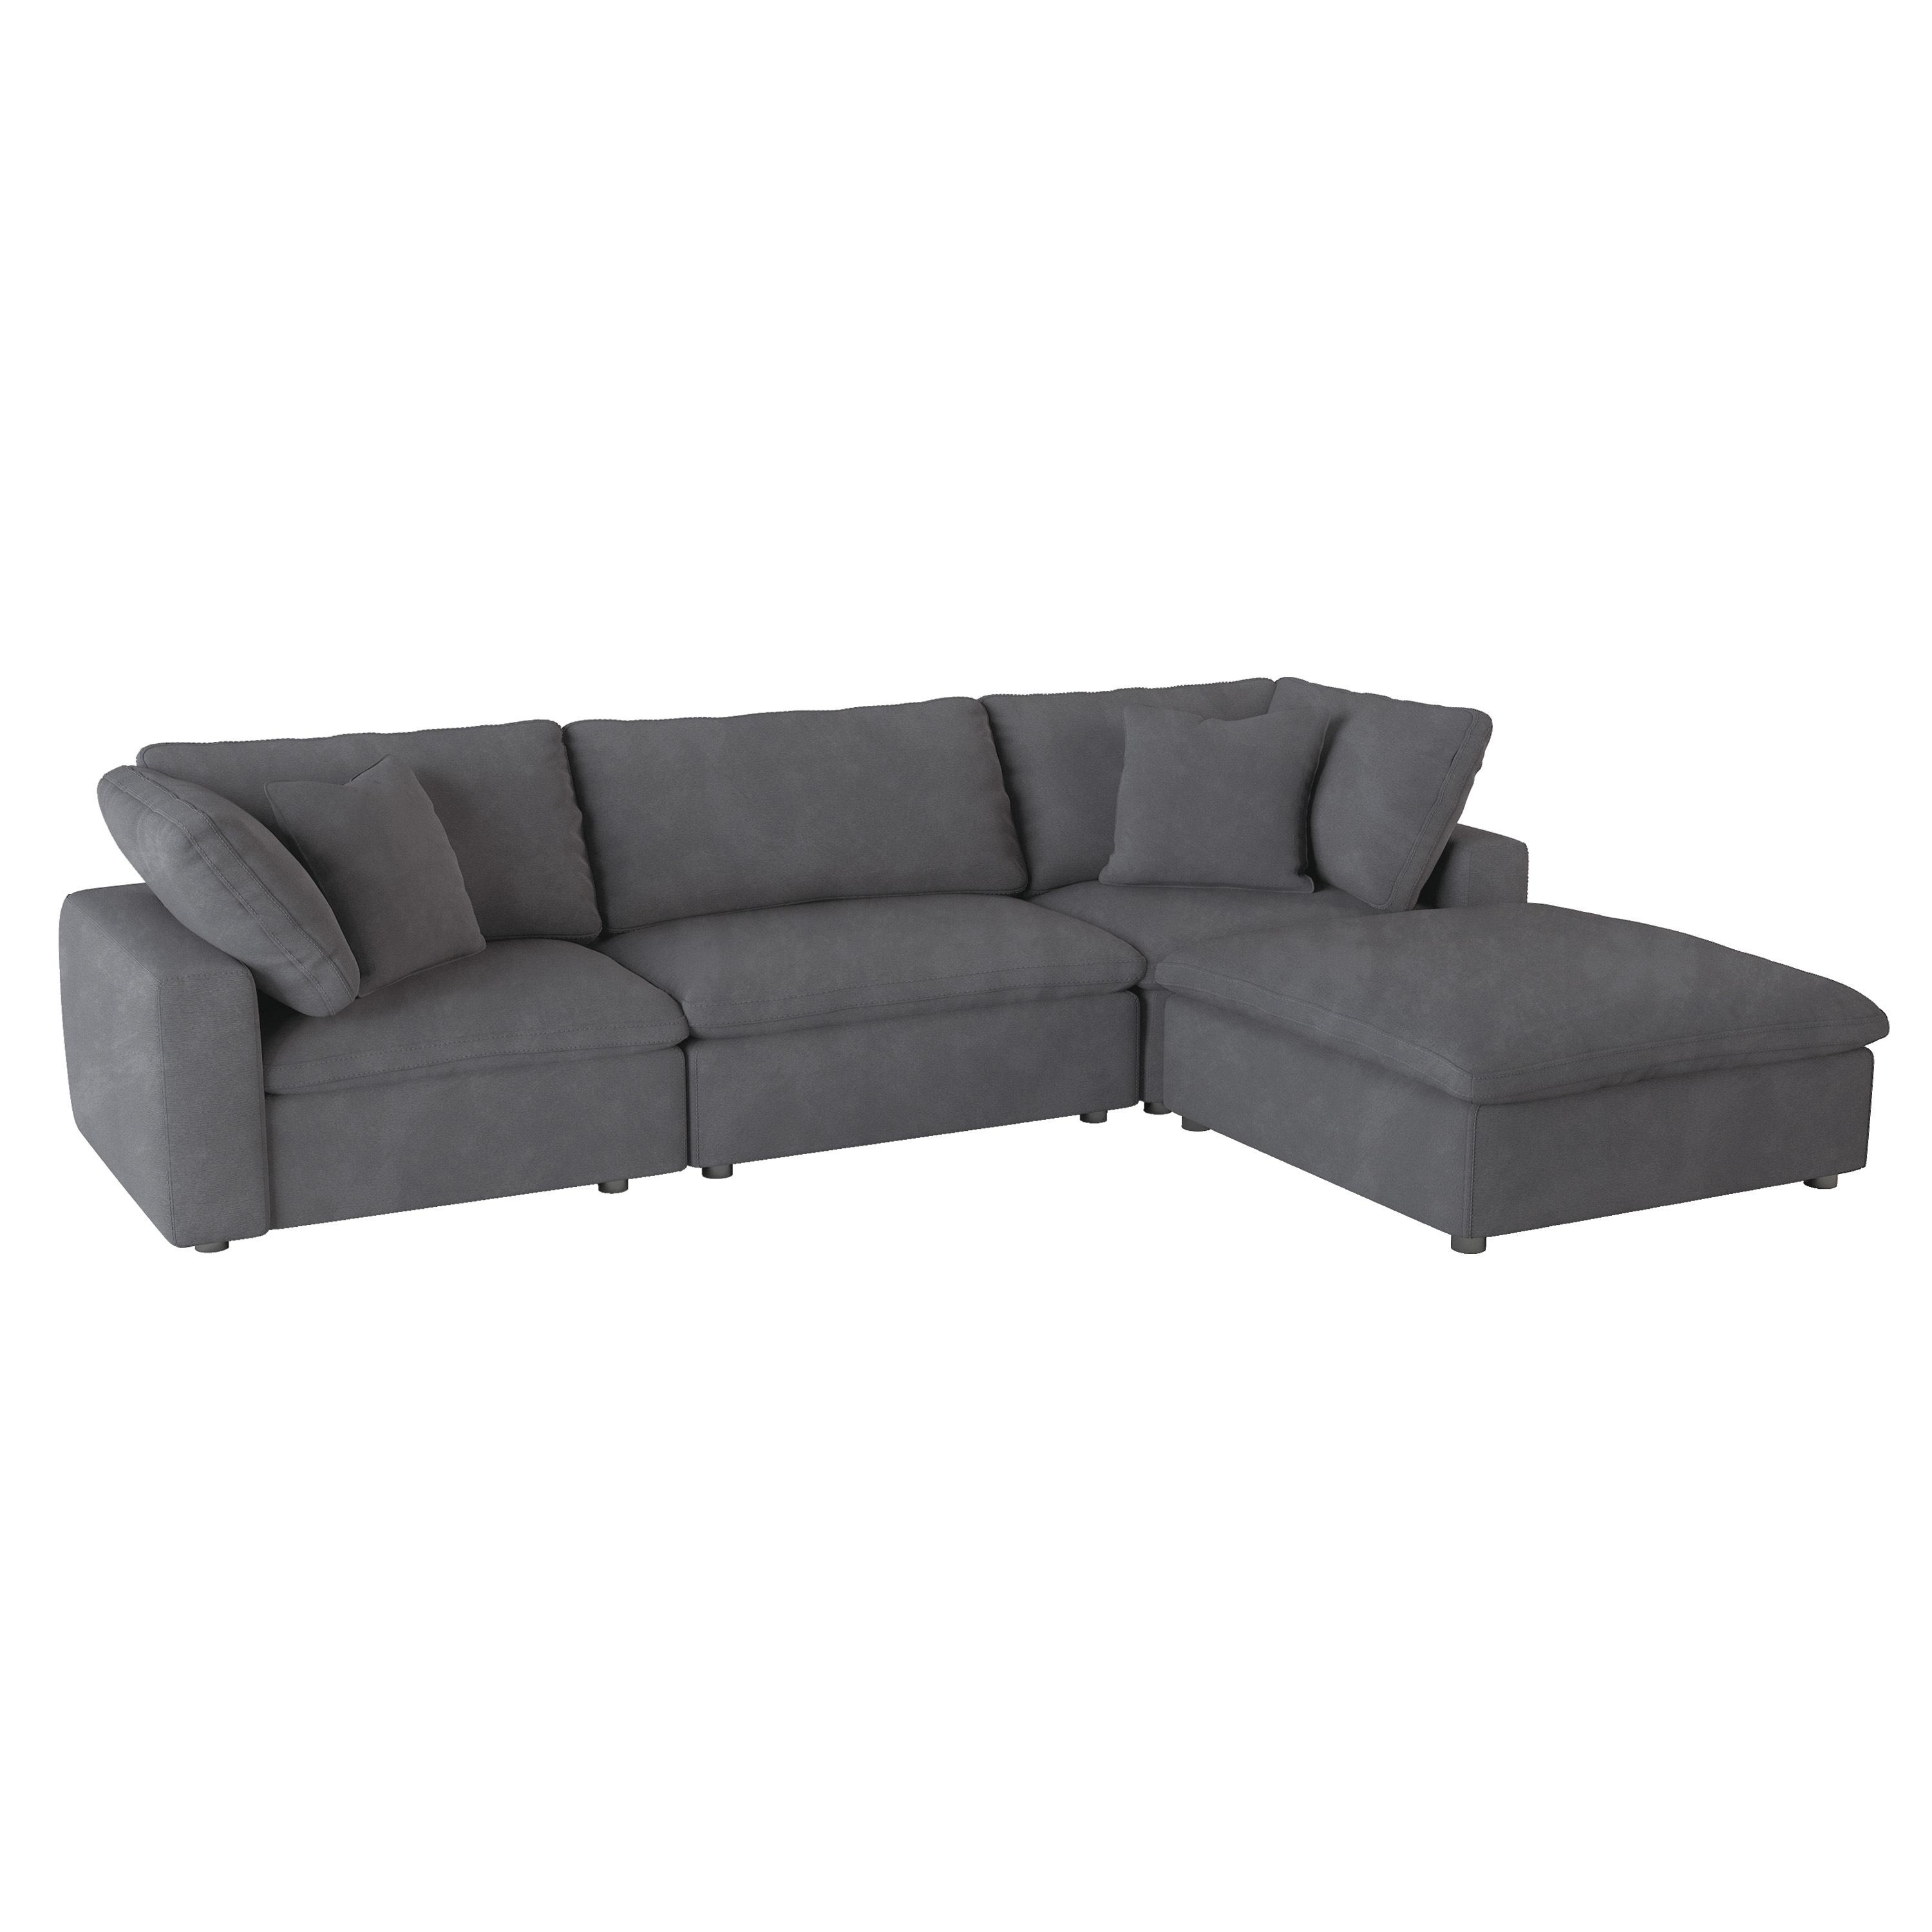 Transitional Sectional 9546GY*4OT Guthrie 9546GY*4OT in Gray Microfiber